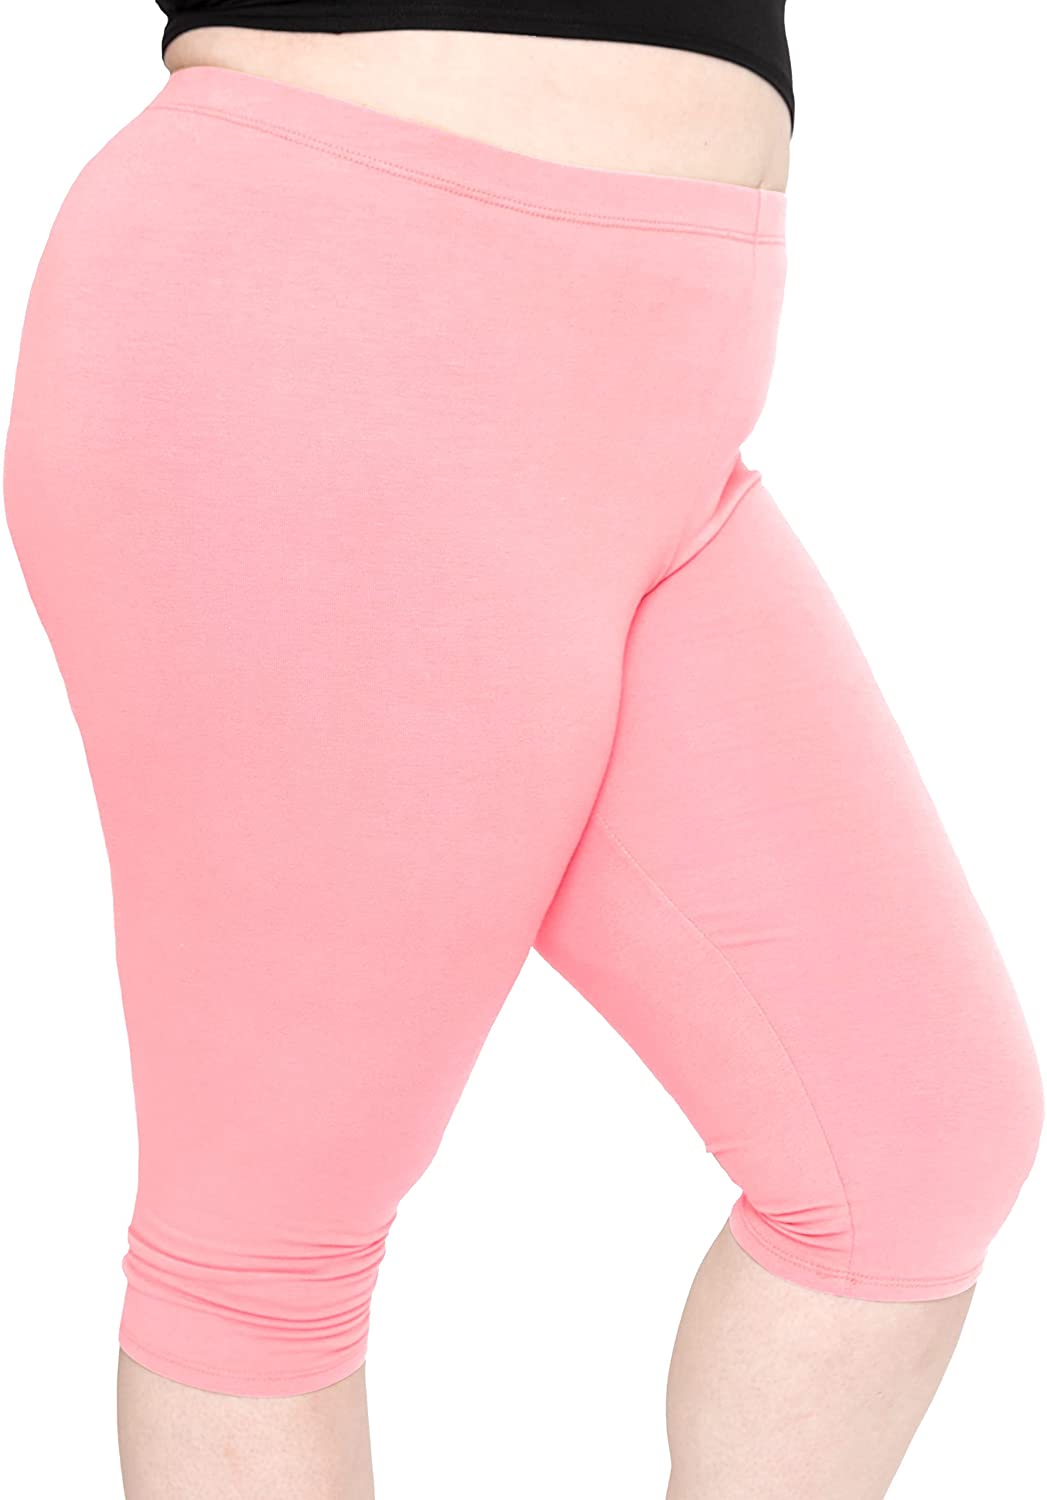 $5/mo - Finance Oh So Soft Women's Plus Size Knee Lenth and Full